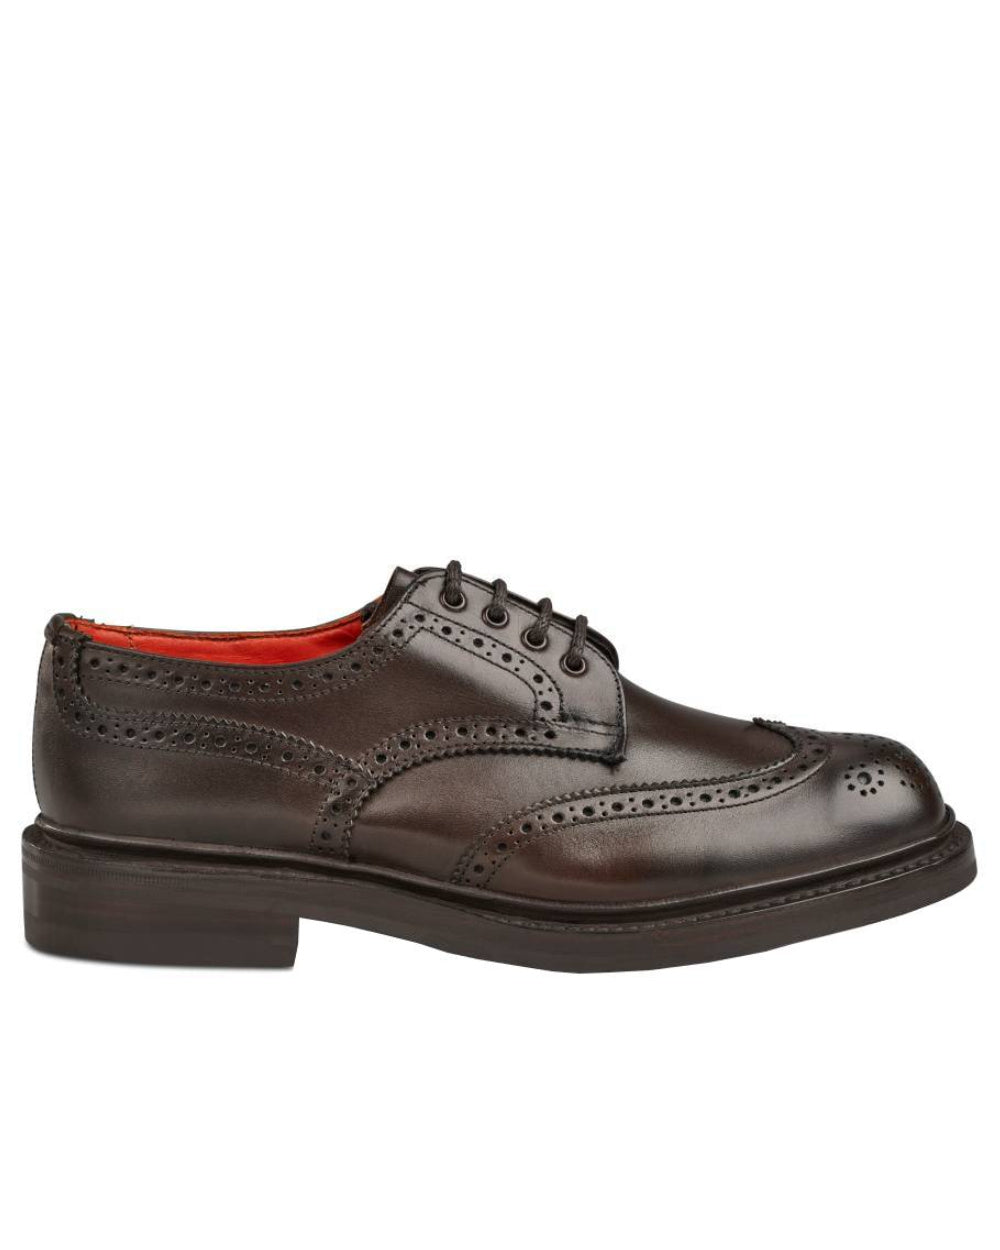 Espresso Burnished Coloured Trickers Anne Leather Sole Brogue Country Shoe On A White Background 